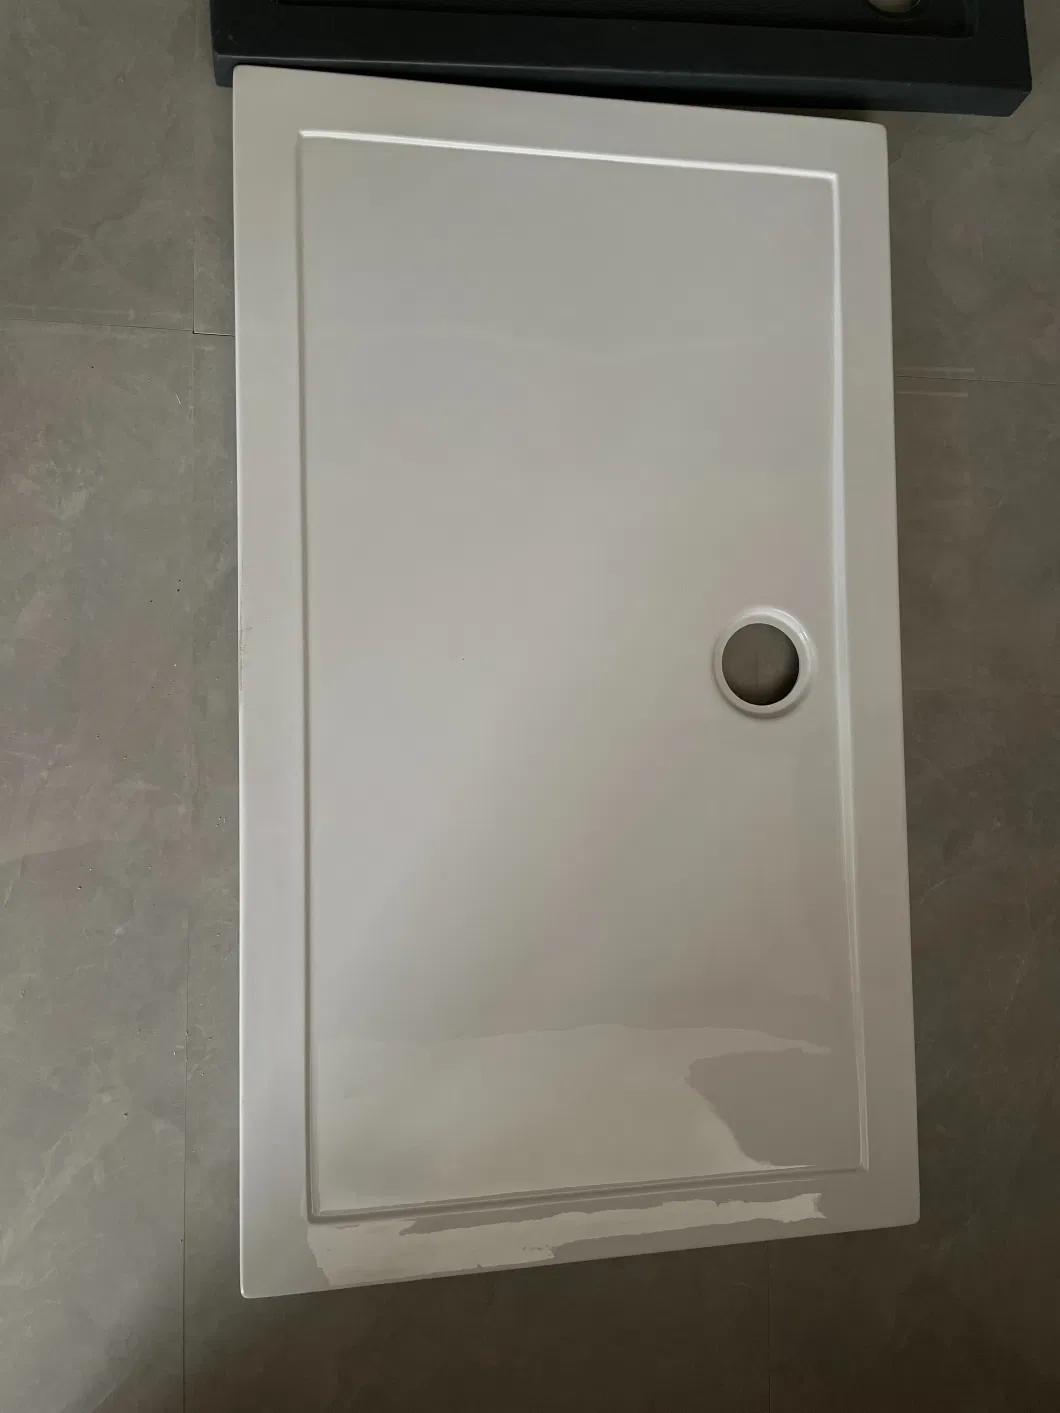 High Quality Acrylic Materials Rectangle Bathroom Shower Base Tray